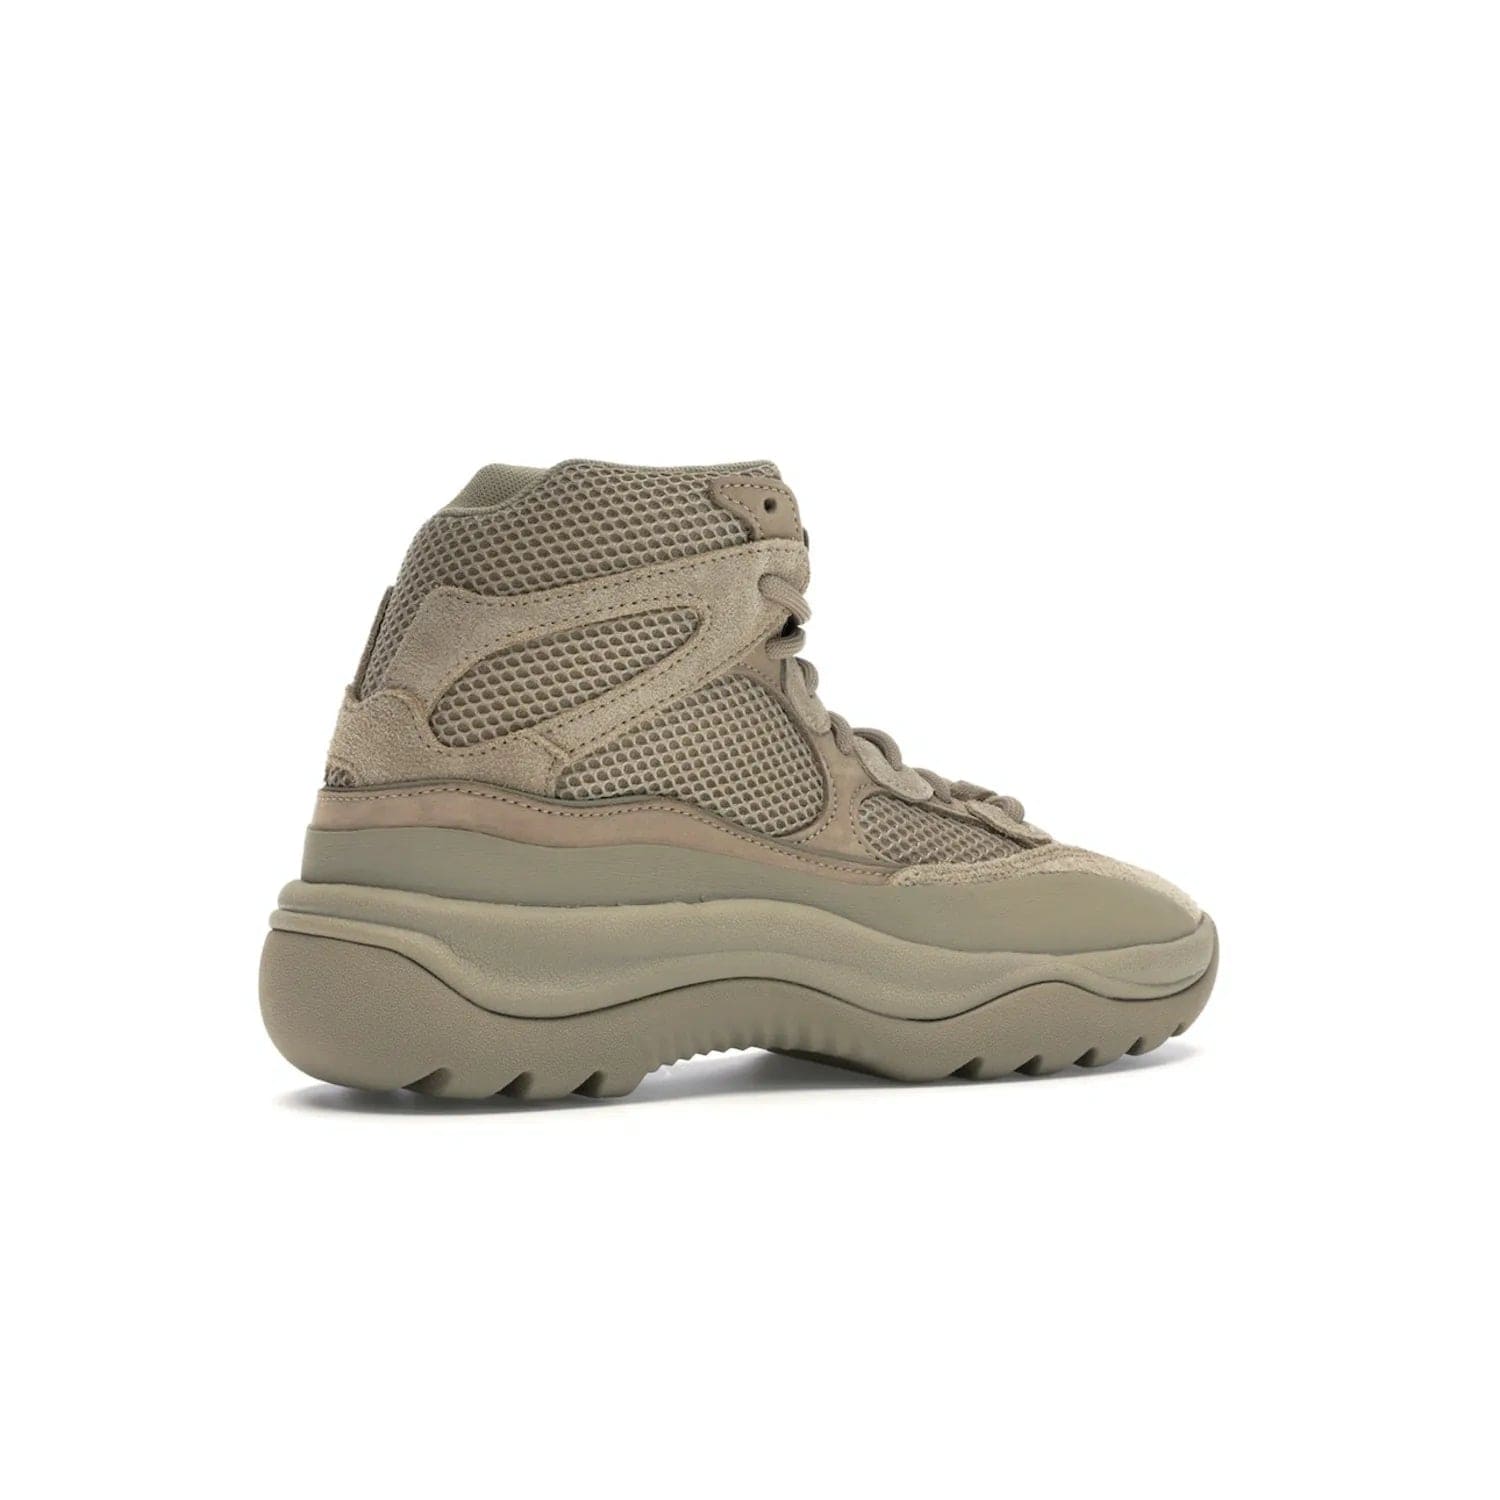 adidas Yeezy Desert Boot Rock - Image 34 - Only at www.BallersClubKickz.com - #
This season, make a fashion statement with the adidas Yeezy Desert Boot Rock. Nubuck and suede upper offers tonal style while the grooved sole provides traction and stability. Get yours in April 2019.